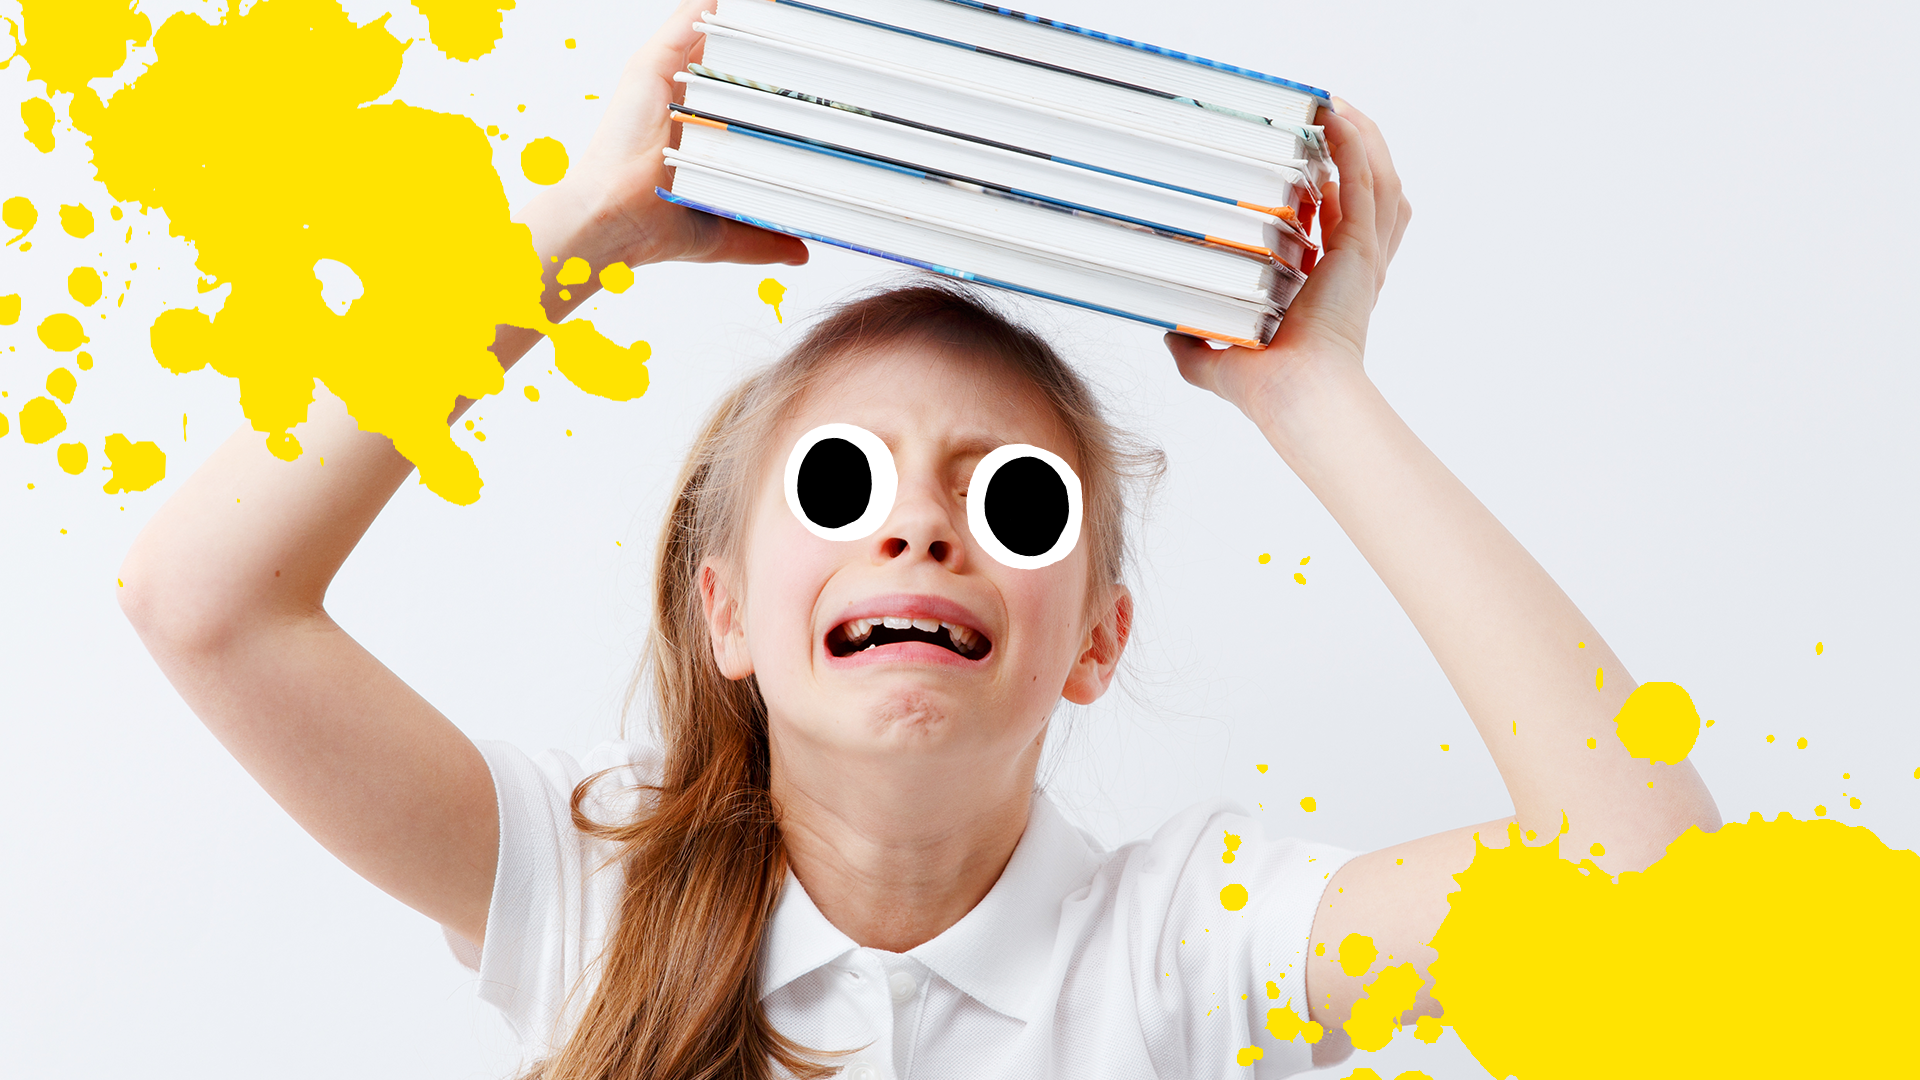 Girl looking upset with stack of books on white background with yelllow splats 